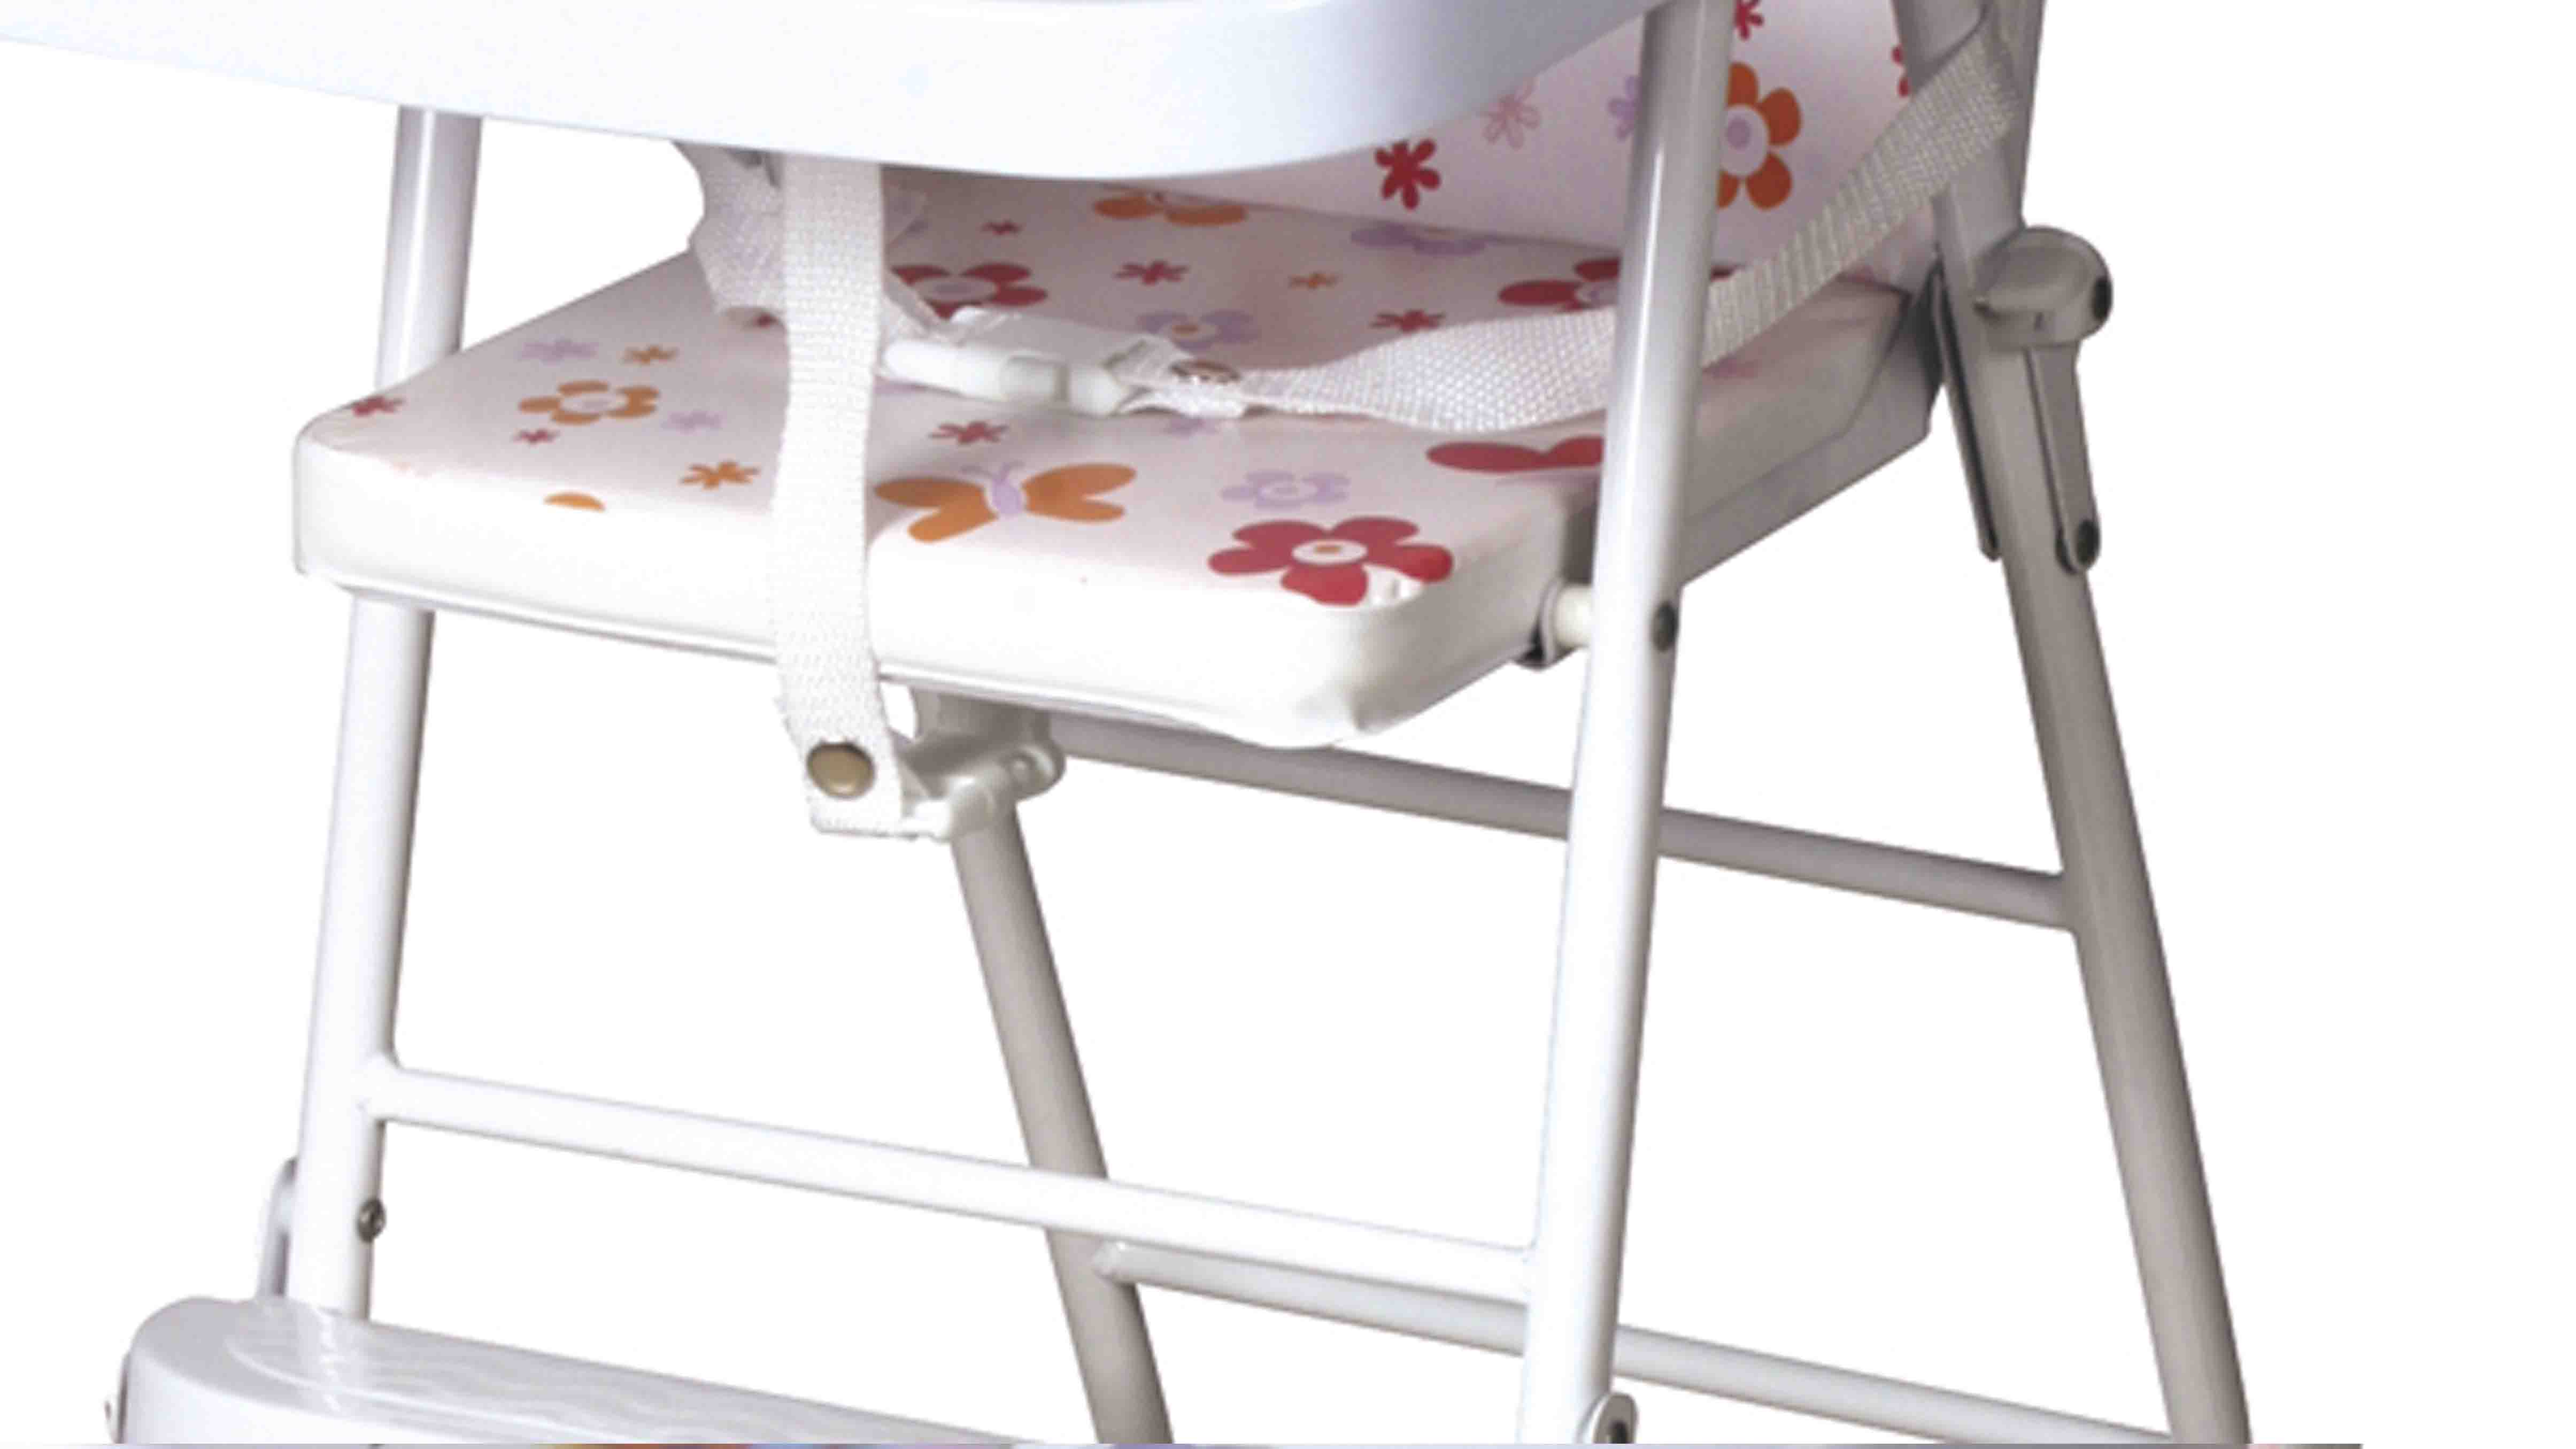 Aoqi foldable baby high chair from China for home